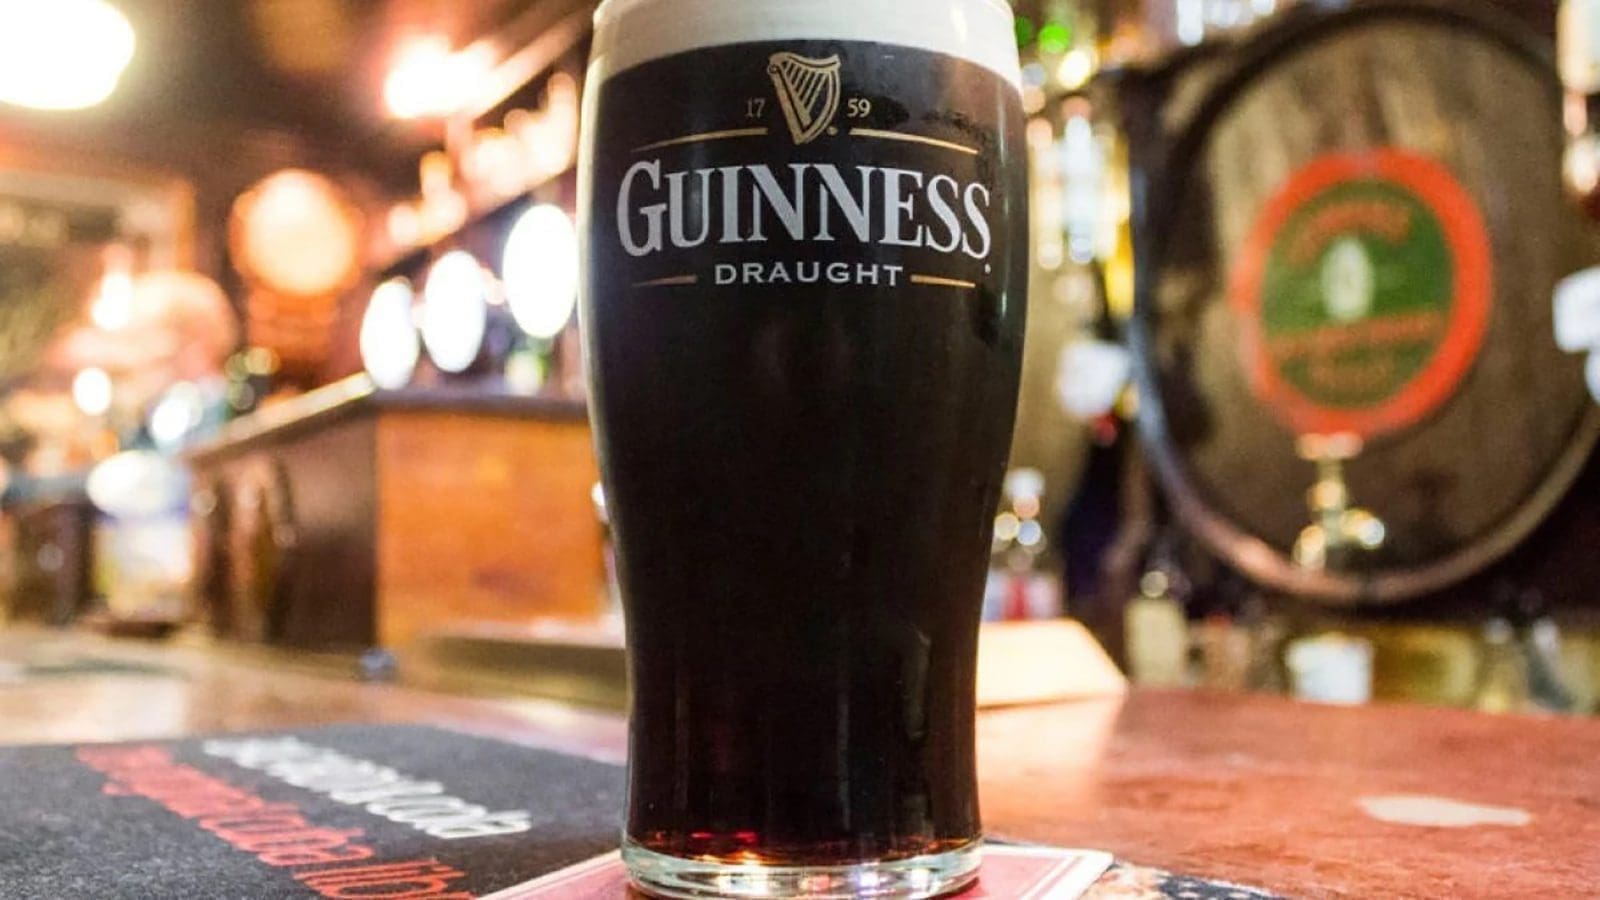 Guinness Nigeria reports 29% growth in full-year revenue, driving profit growth